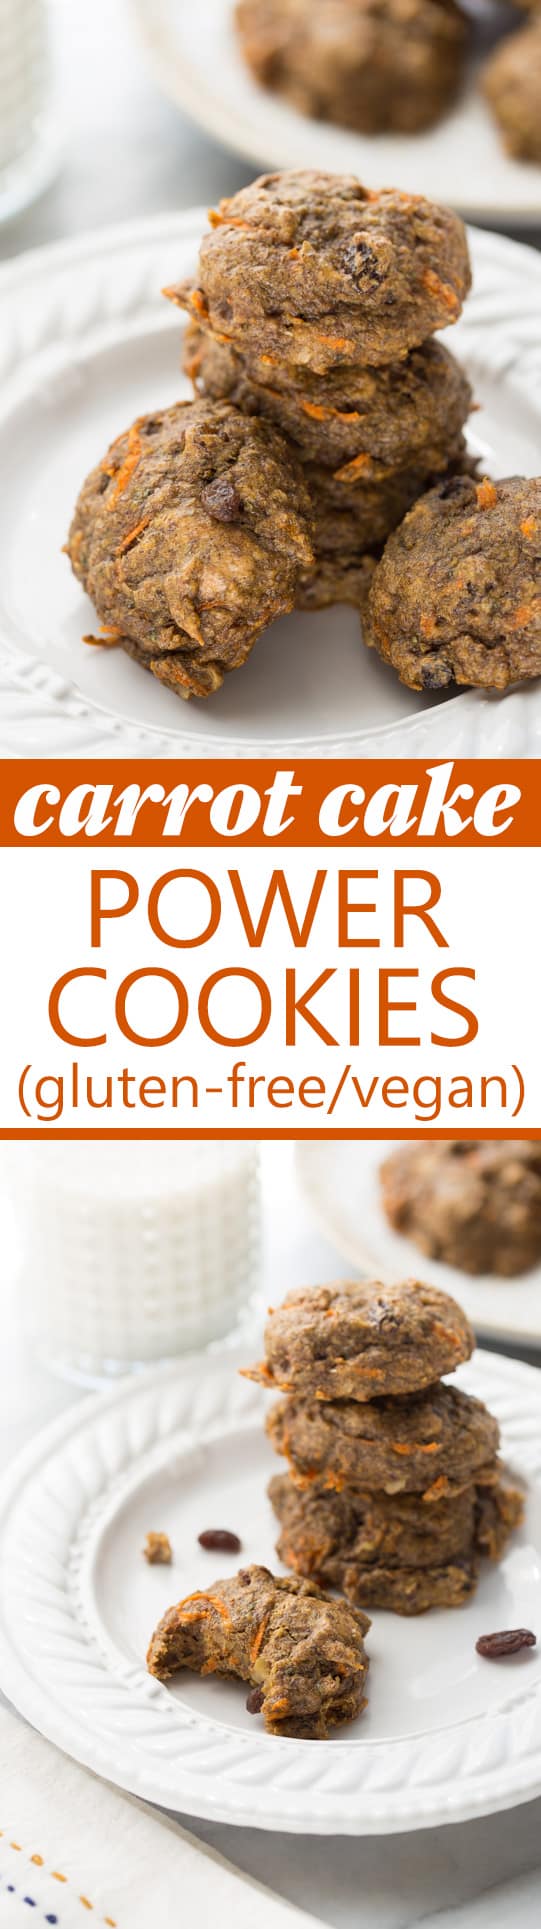 Carrot Cake Power Cookies! Healthy, gluten-free and vegan breakfast cookies that are full of superfoods. Delicious and kid-friendly!